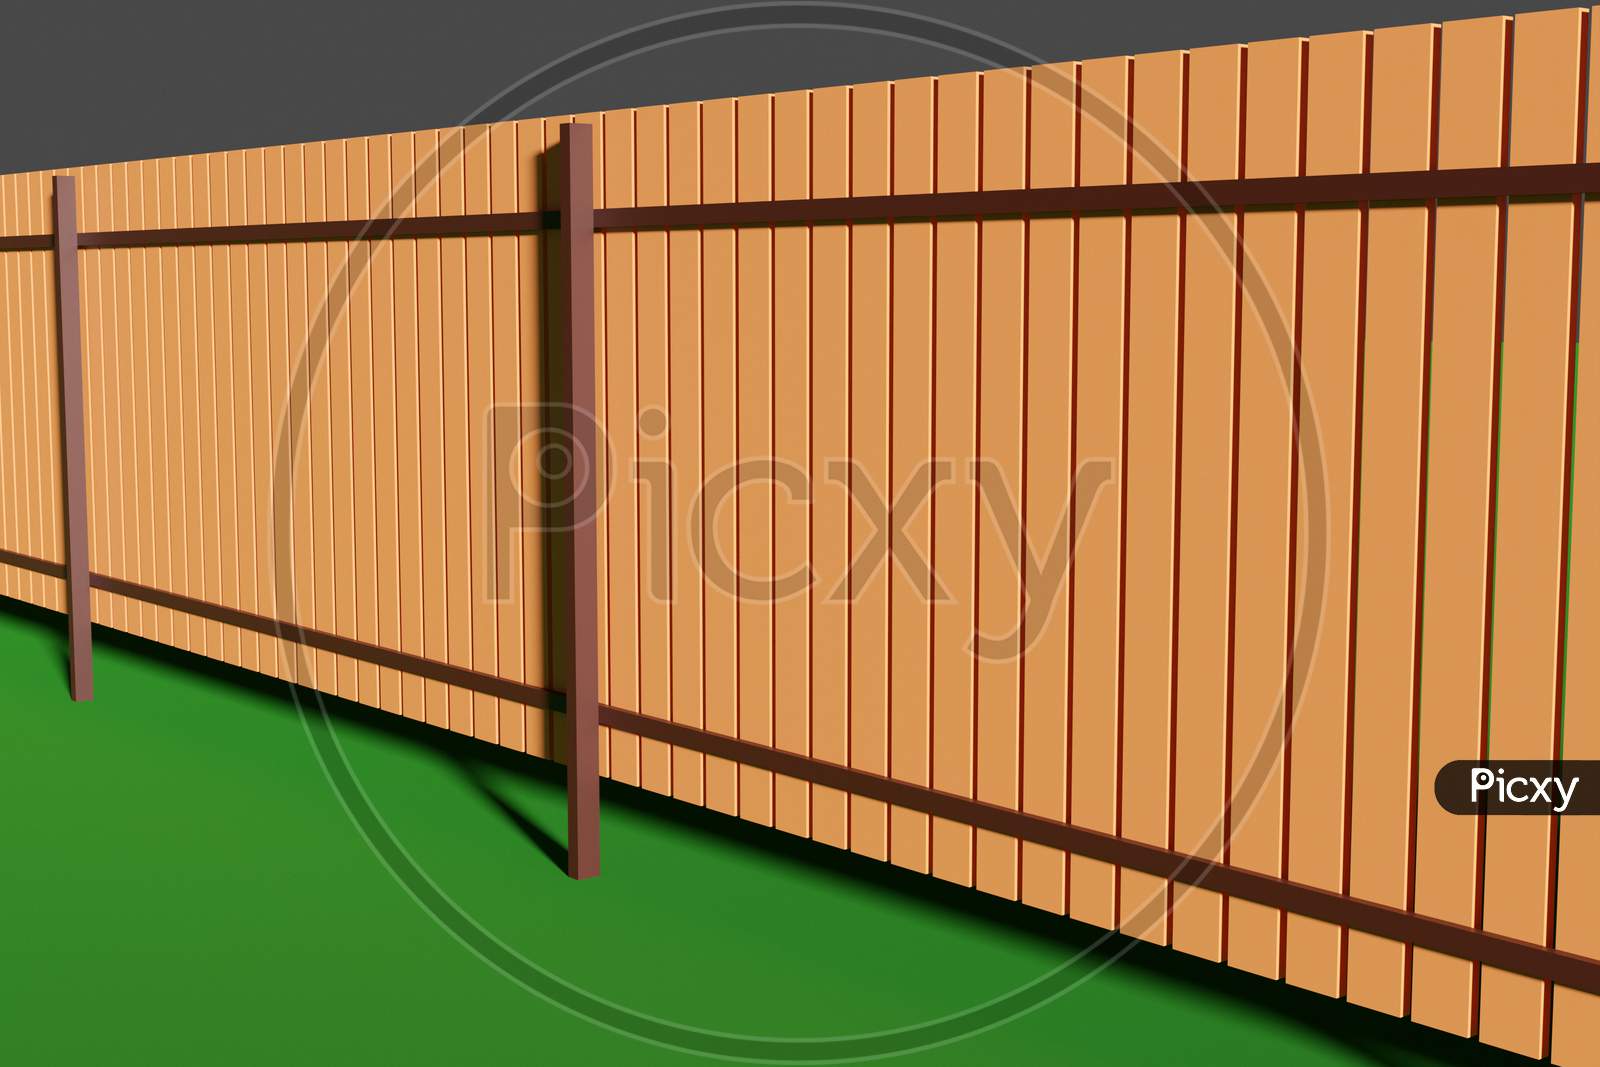 3D Illustration Of A Plan For The Construction Of A Wooden Fence On A Green Background